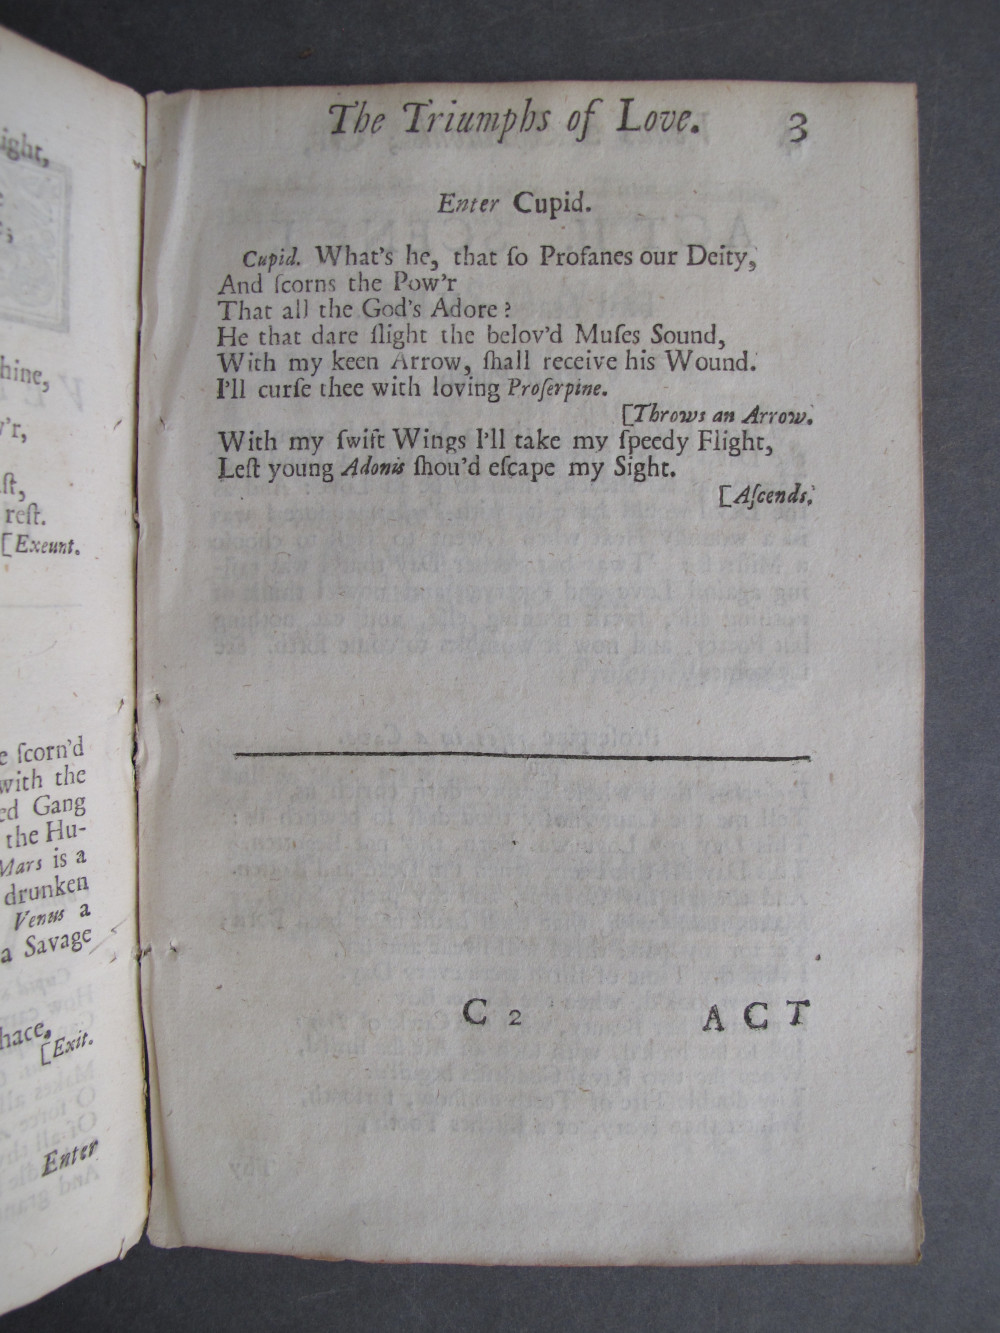 Page 3, text: 
The Triumphs of Love. 3

Enter Cupid.

Cupid. What's he, that so Profanes our Deity,
And scorns the Pow'r
That all the God's Adore?
He that dare slight the belov'd Muses Sound,
With my keen arrow, shall receive his Wound.
I'll curse thee with loving Proserpine.
[Throws an Arrow.
With my swift Wings I'll take my speedy Flight,
Lest young Adonis shou'd escape my Sight.
[Ascends.

C2 ACT

